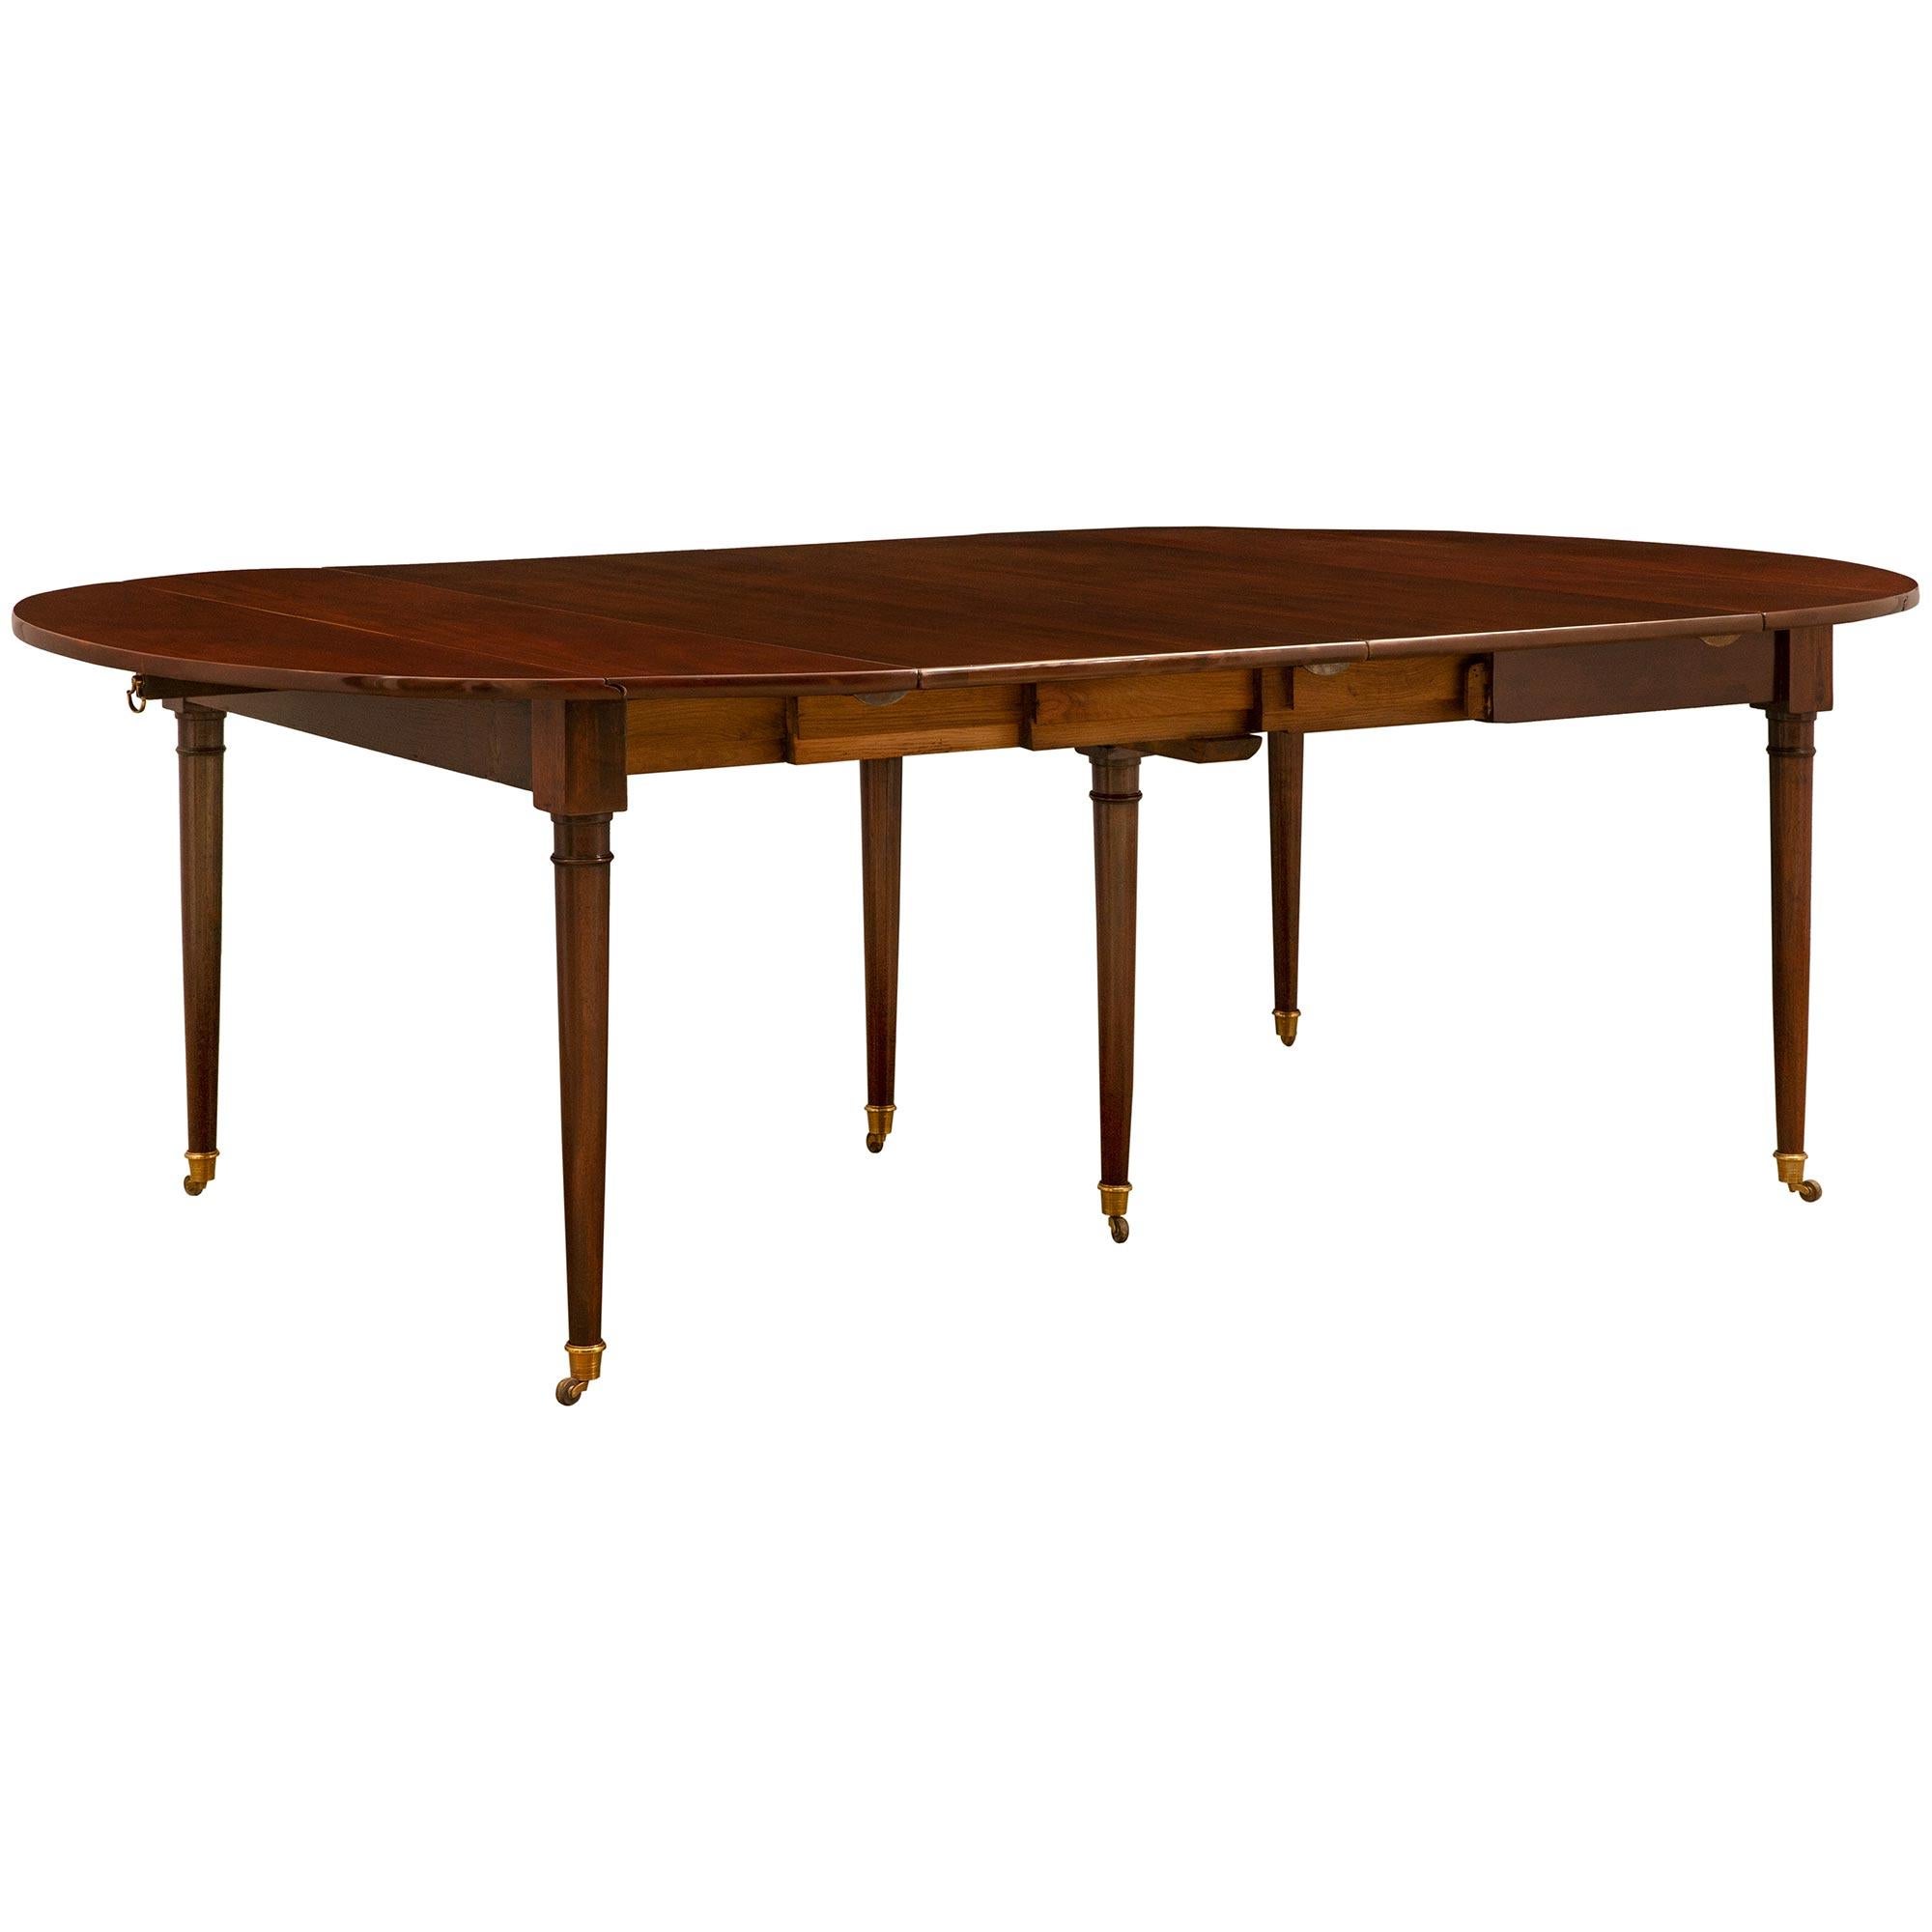 Early 19th Century French Louis XVI Style Mahogany Drop-Leaf Dining Table For Sale 2